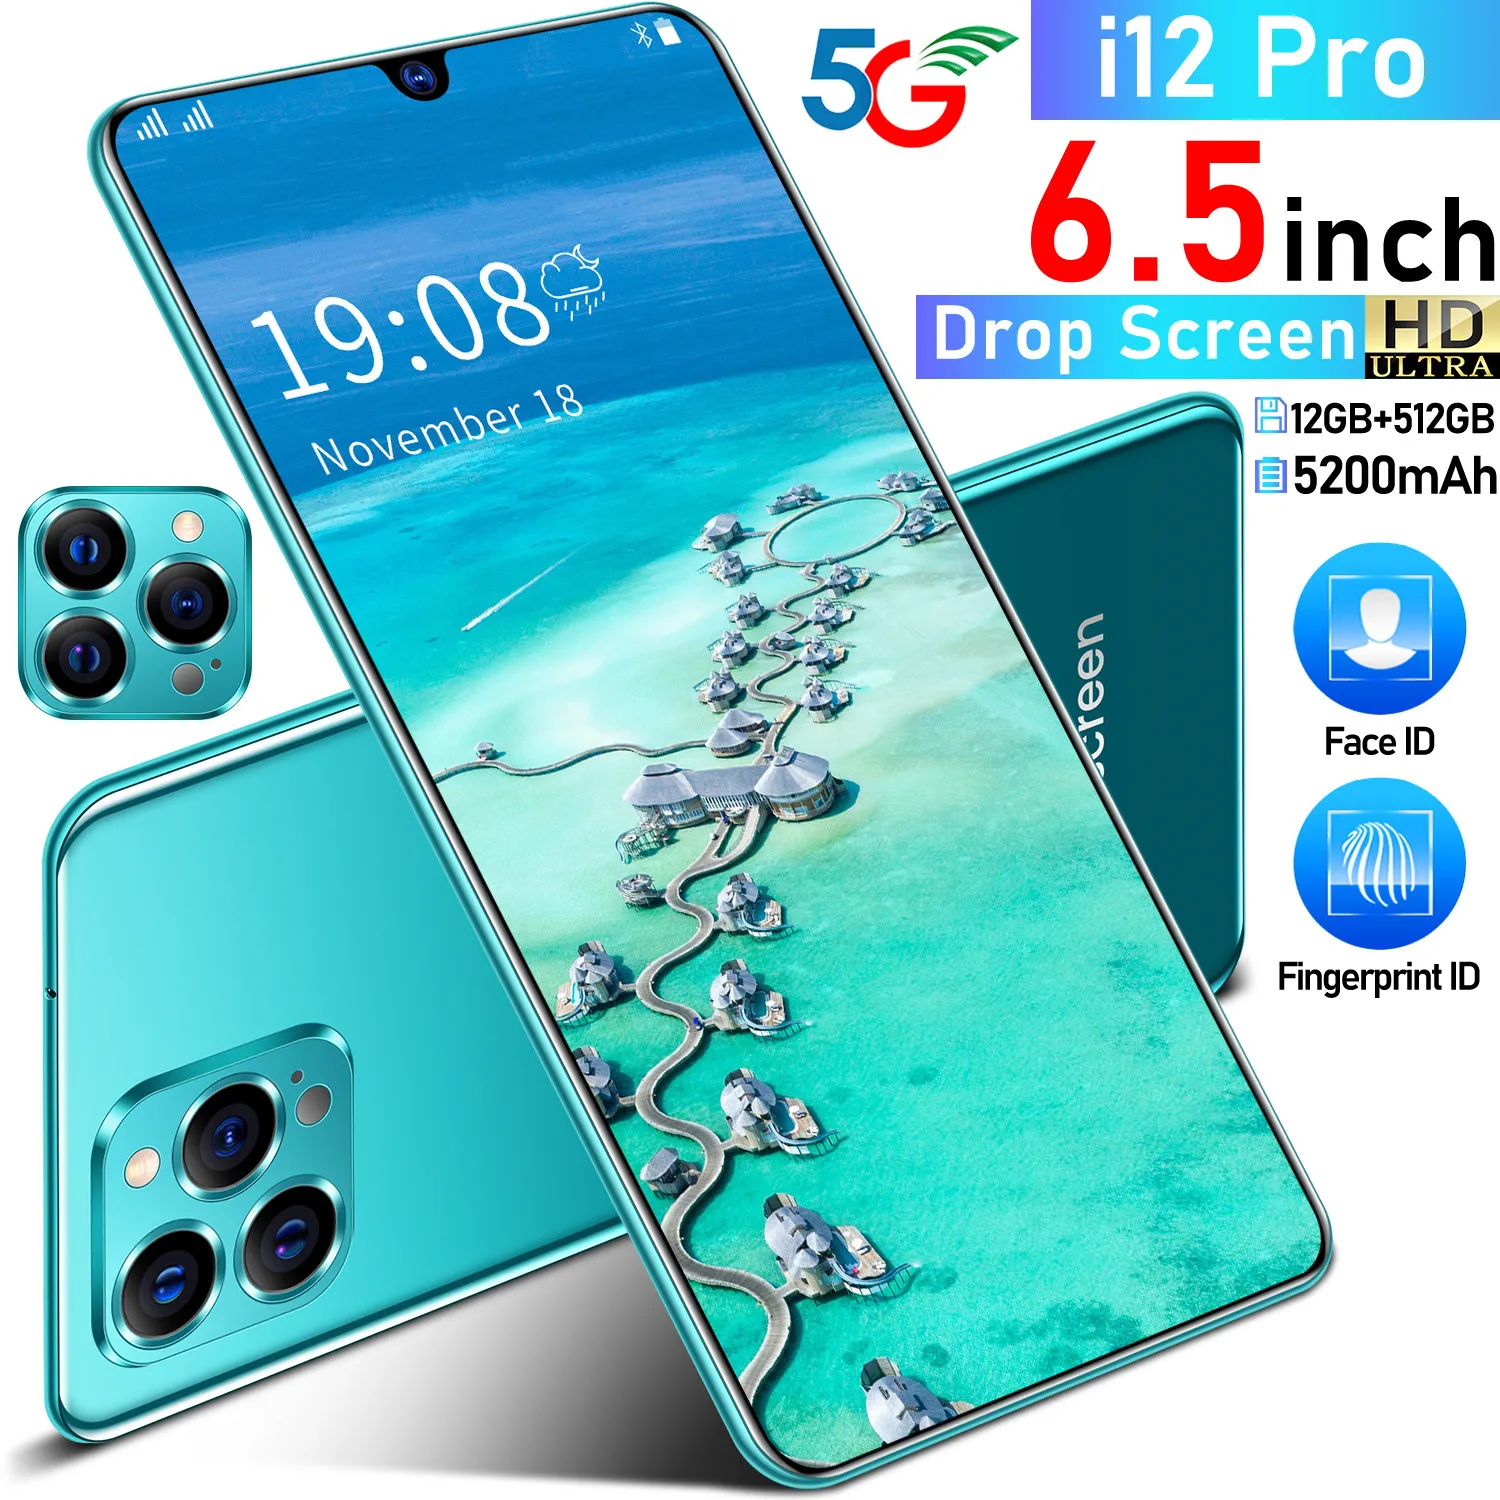 2022 global version 6 5 inch screen 5g smartphone 12gb512gb for apple iphone ip12 pro cellphone samsung huawei mobile phone free global shipping